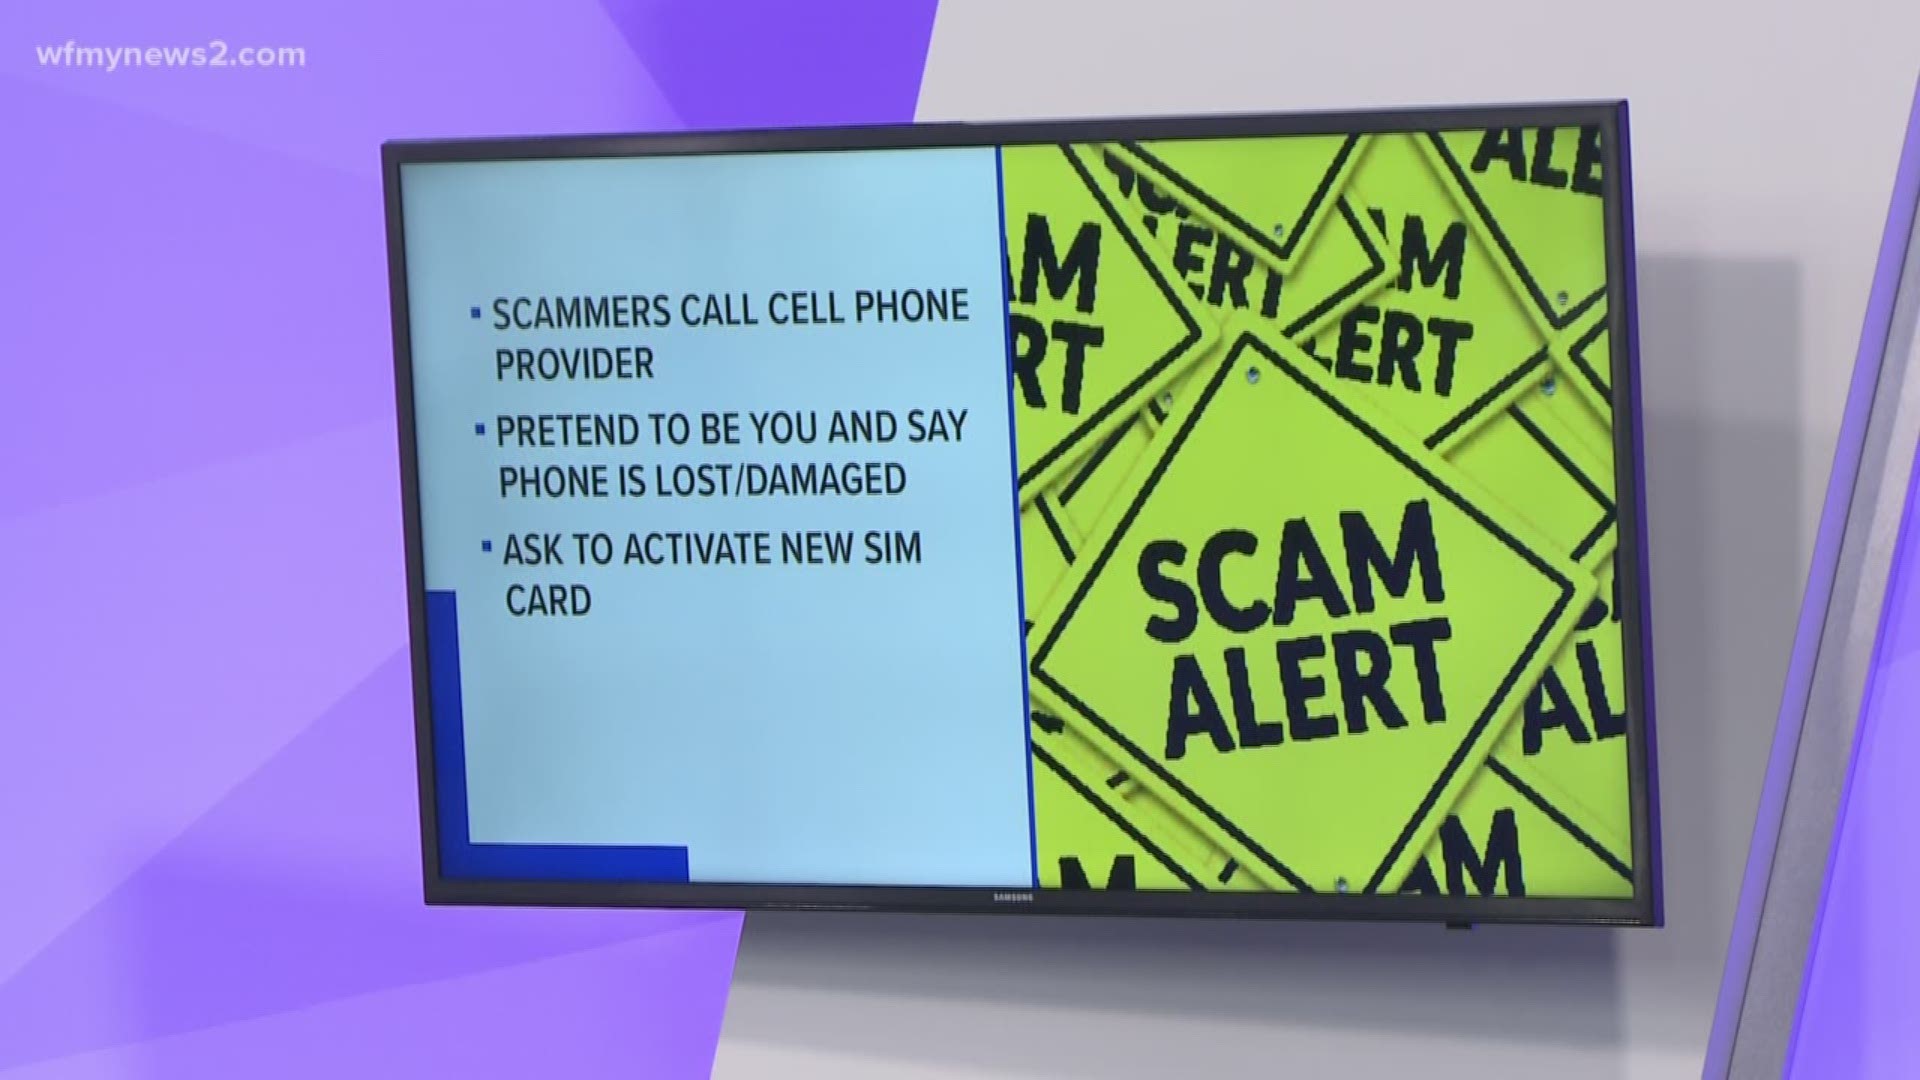 Scammers are now calling your cell phone provider, pretending to be you, and activating a brand SIM card to access your texts, calls, and data.